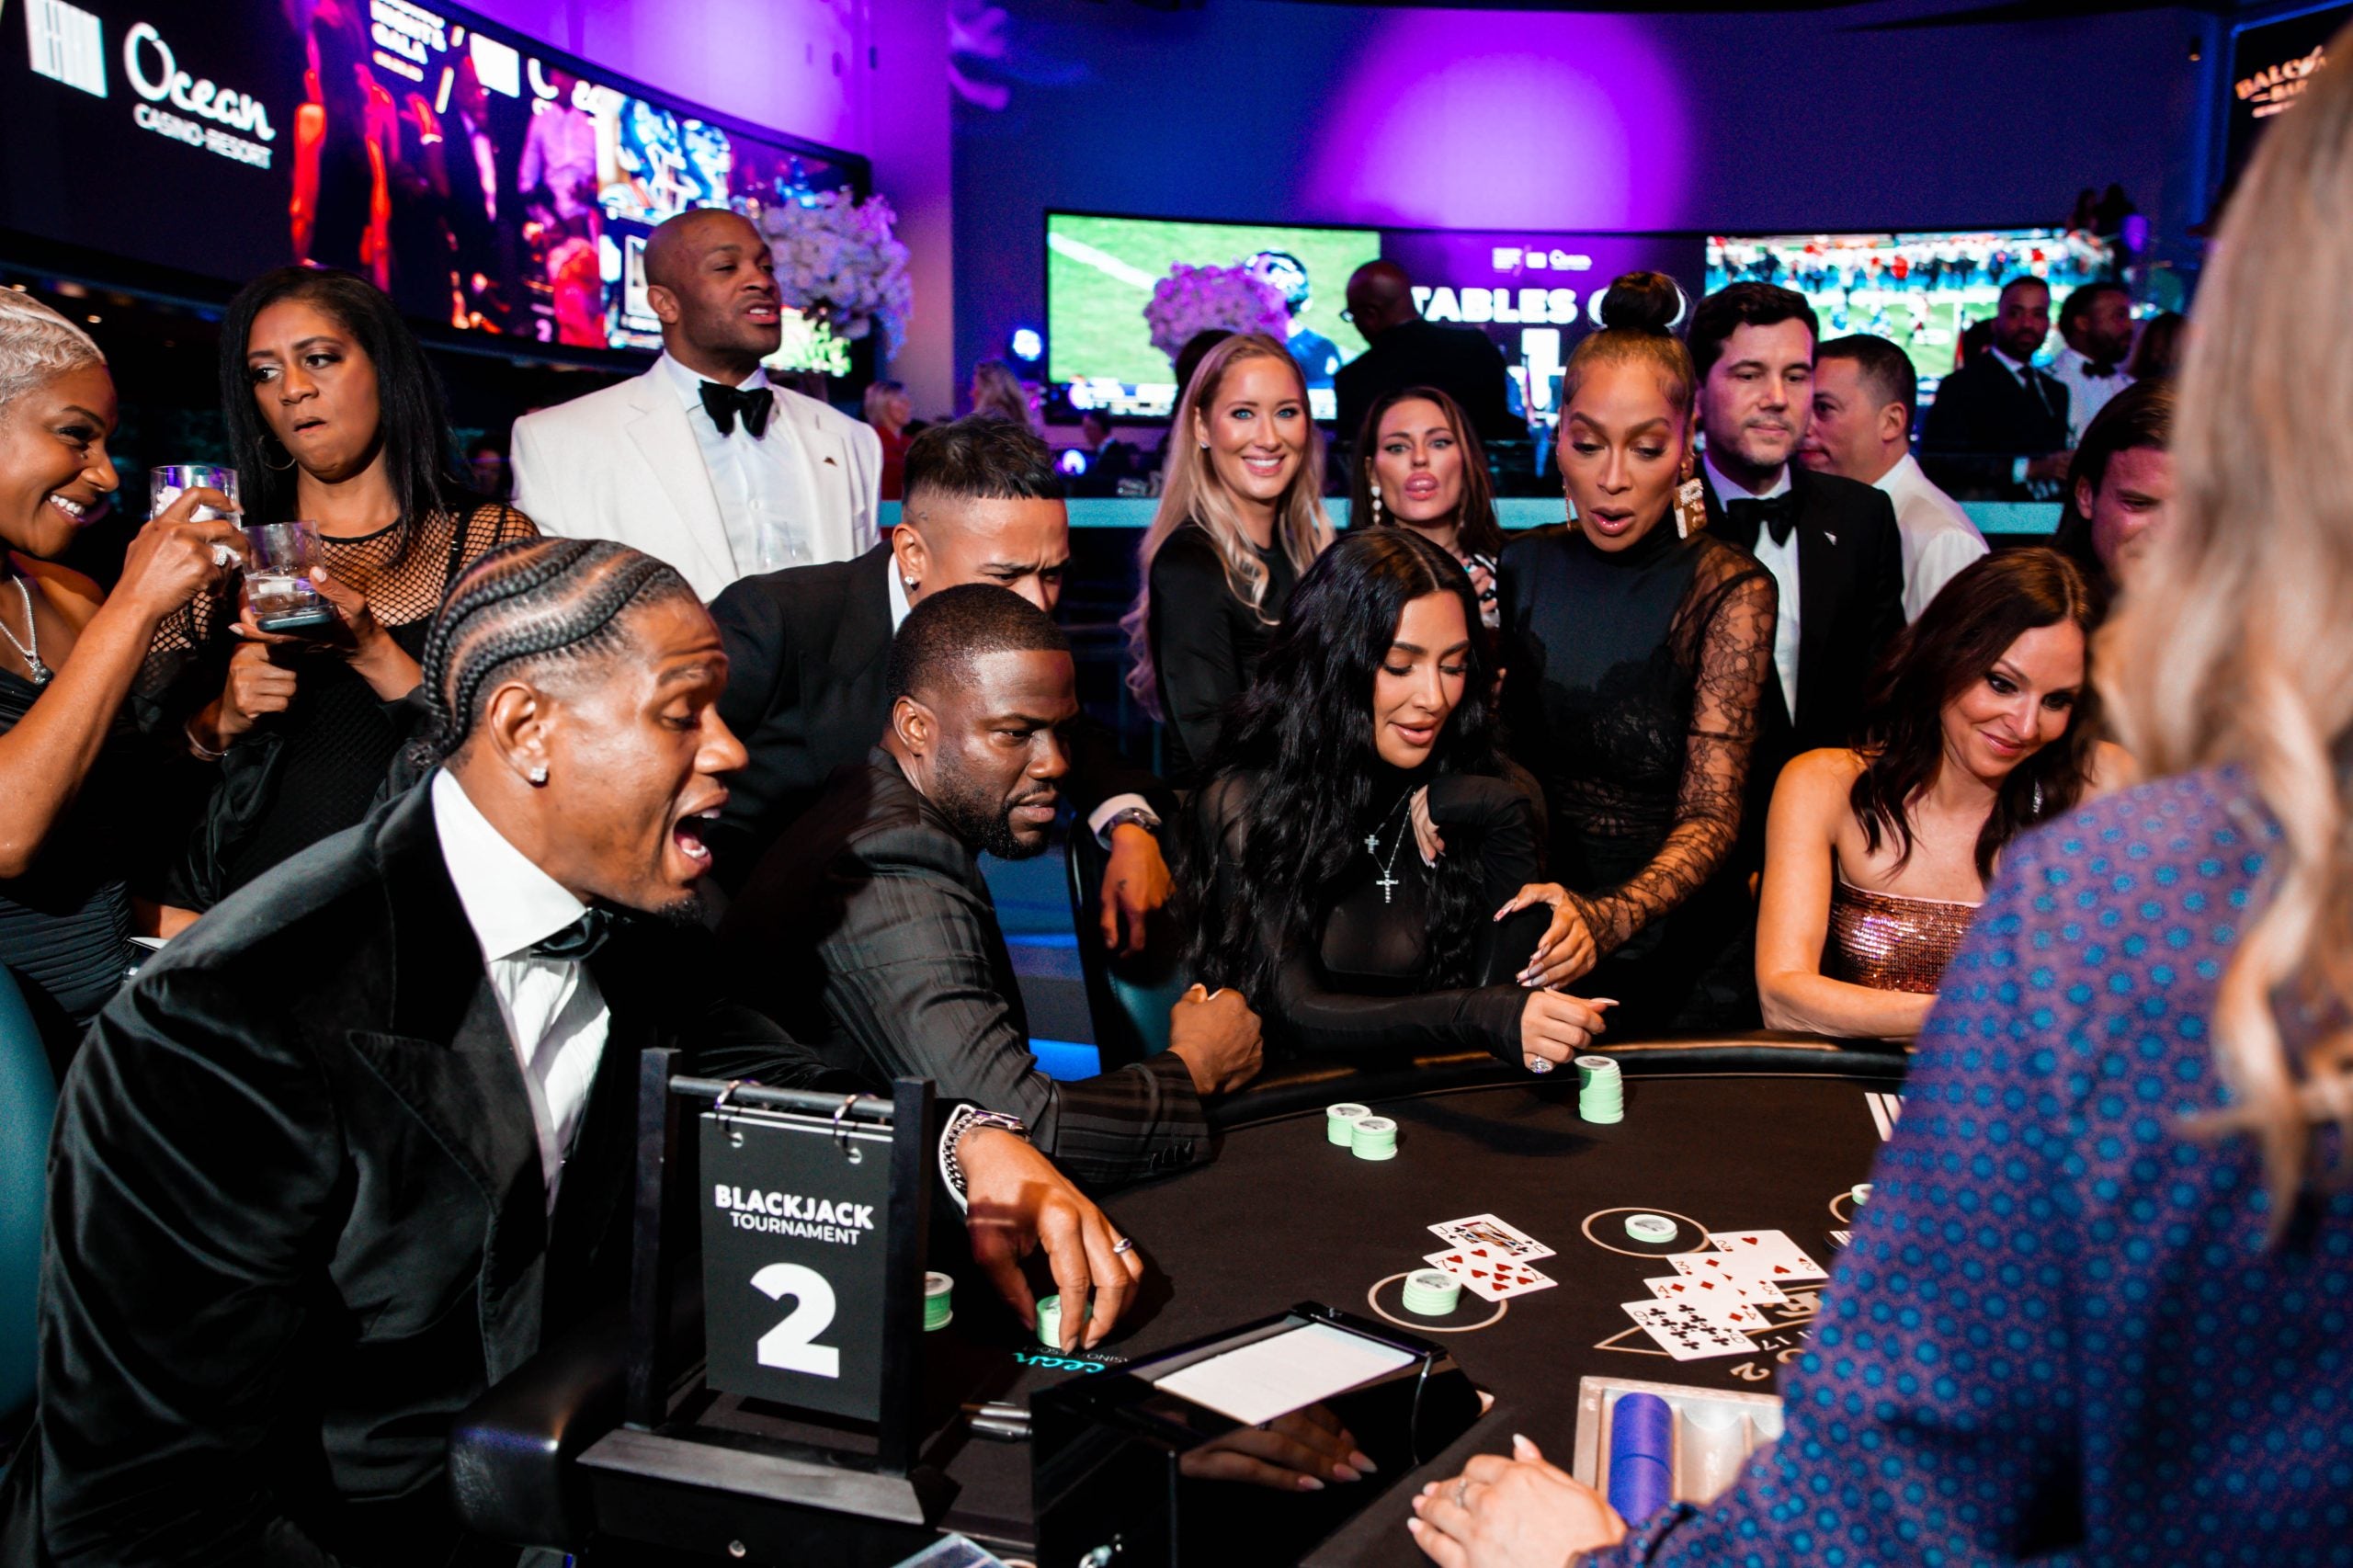 Jay-Z And Meek Mill Host Exclusive Casino Night Fundraiser For Criminal Justice. See The Stars Inside!